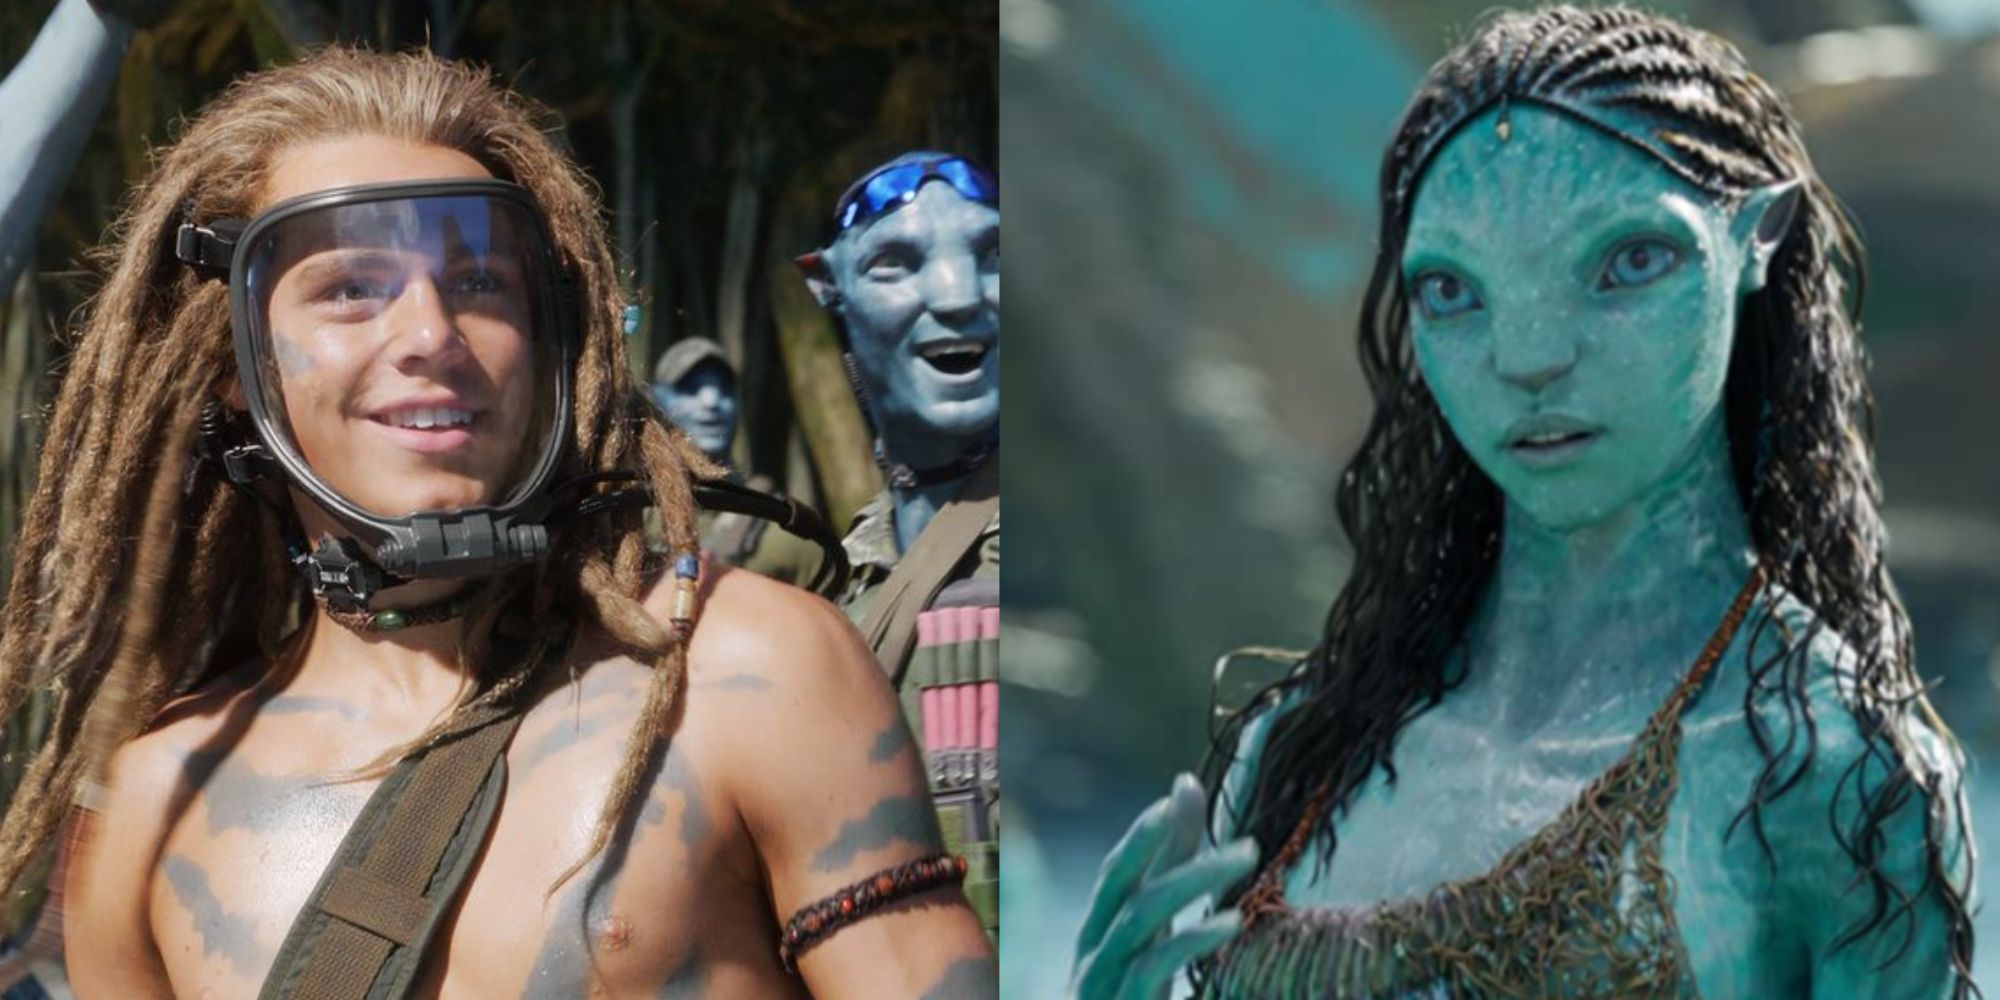 Split images of Spider laughing and Reya looking ahead in Avatar The Way of Water